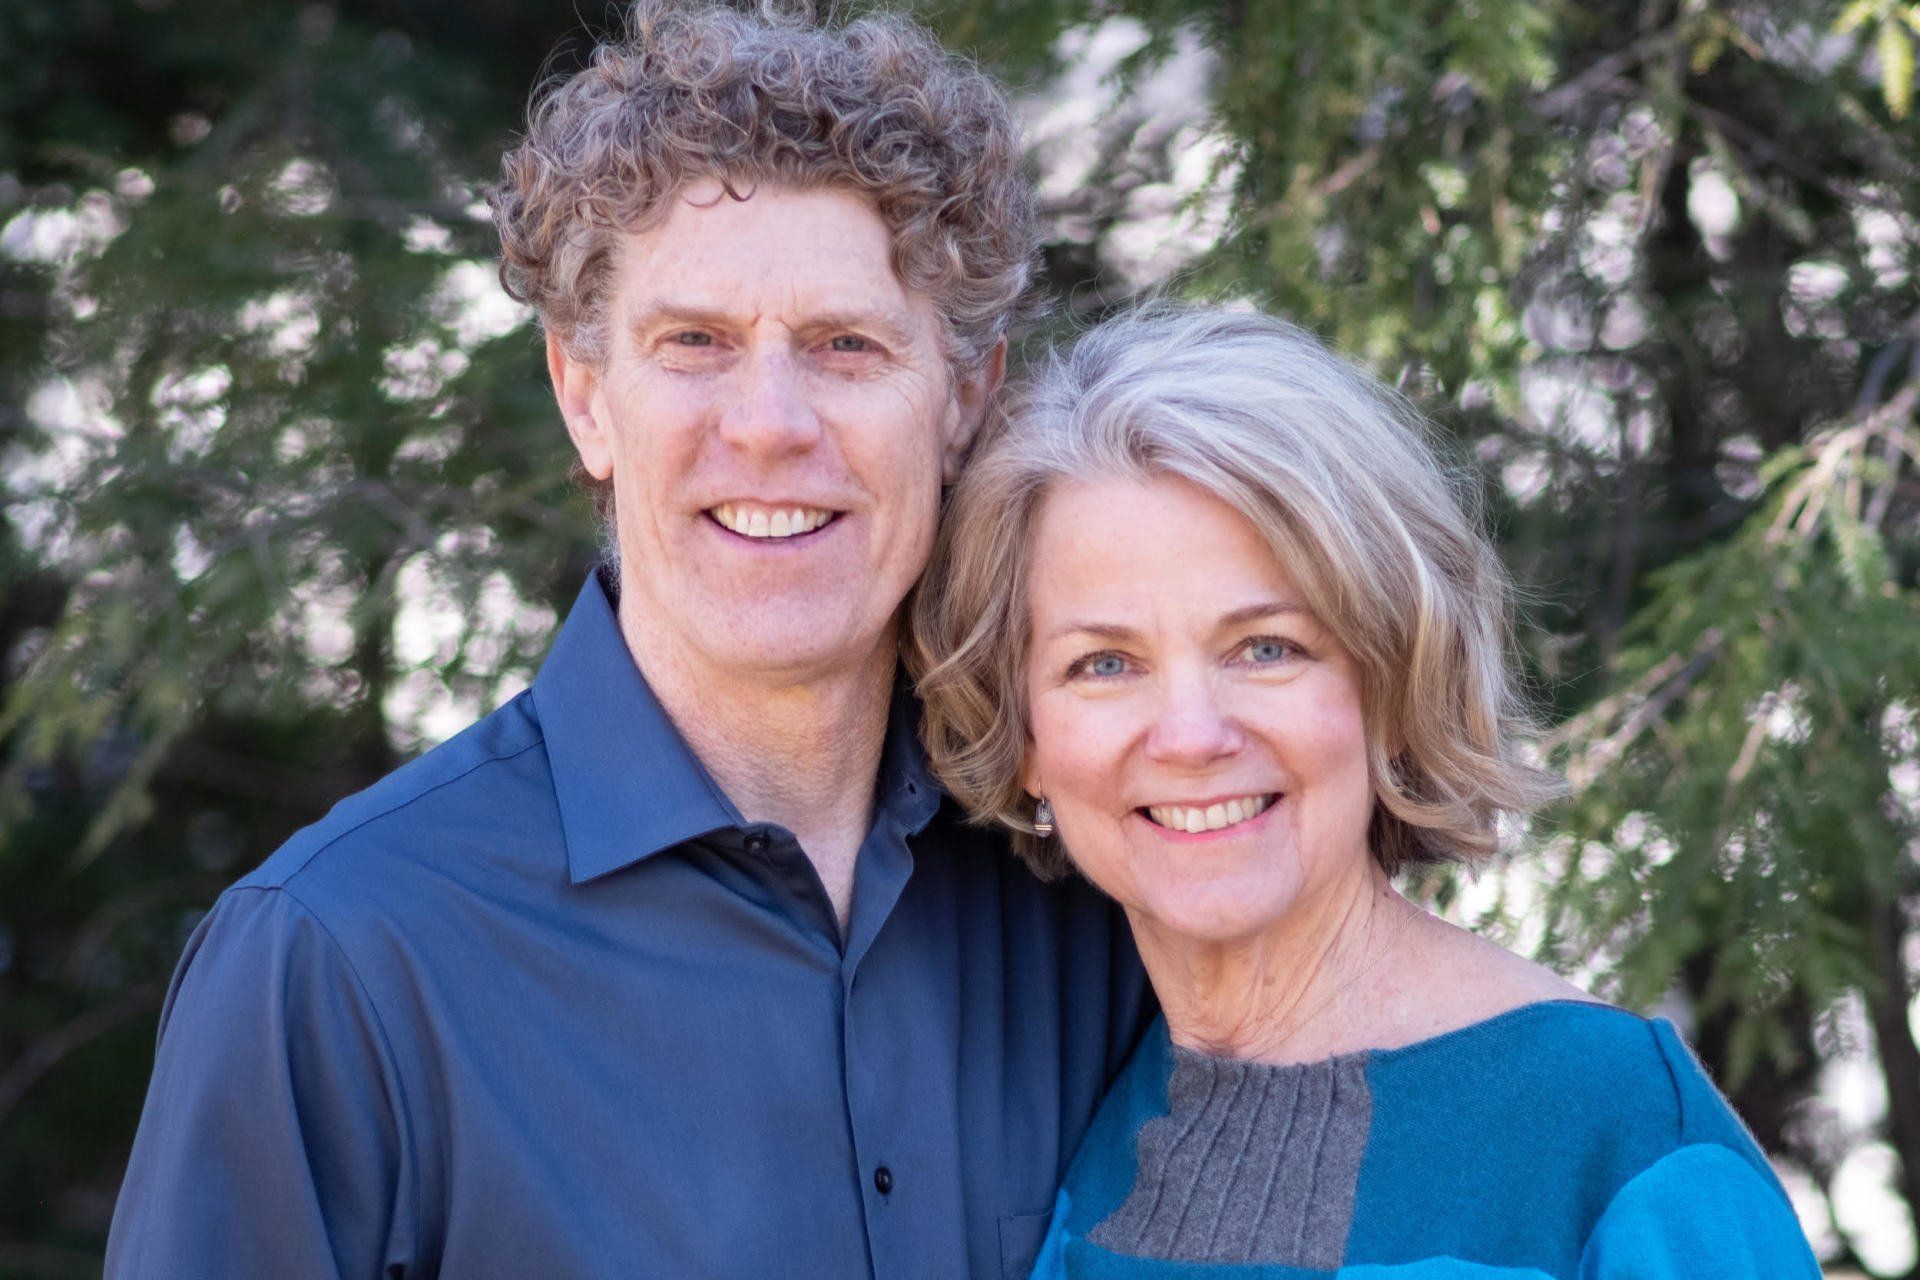 Kim Ploussard, LMHC and David Pettie, ACSW, LCSW, Co-founders of Relationship & Marital Counseling, PLLC, Albany, NY | Teaching People to Grow In Love